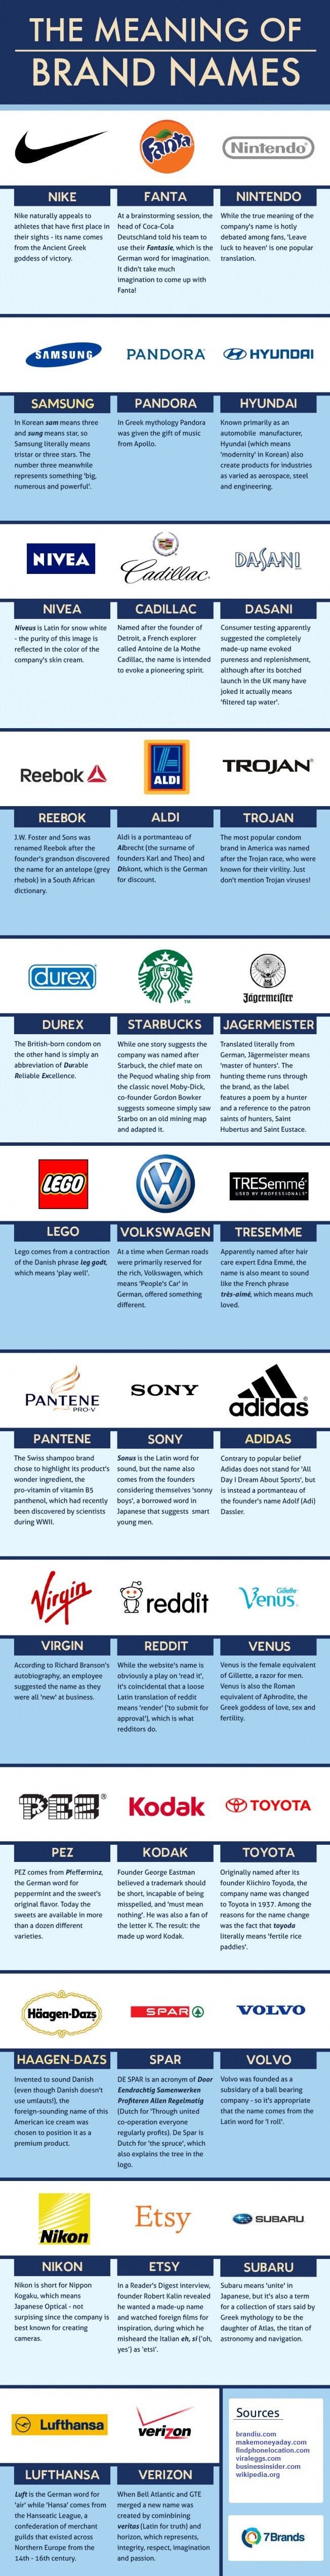 nike brand name meaning